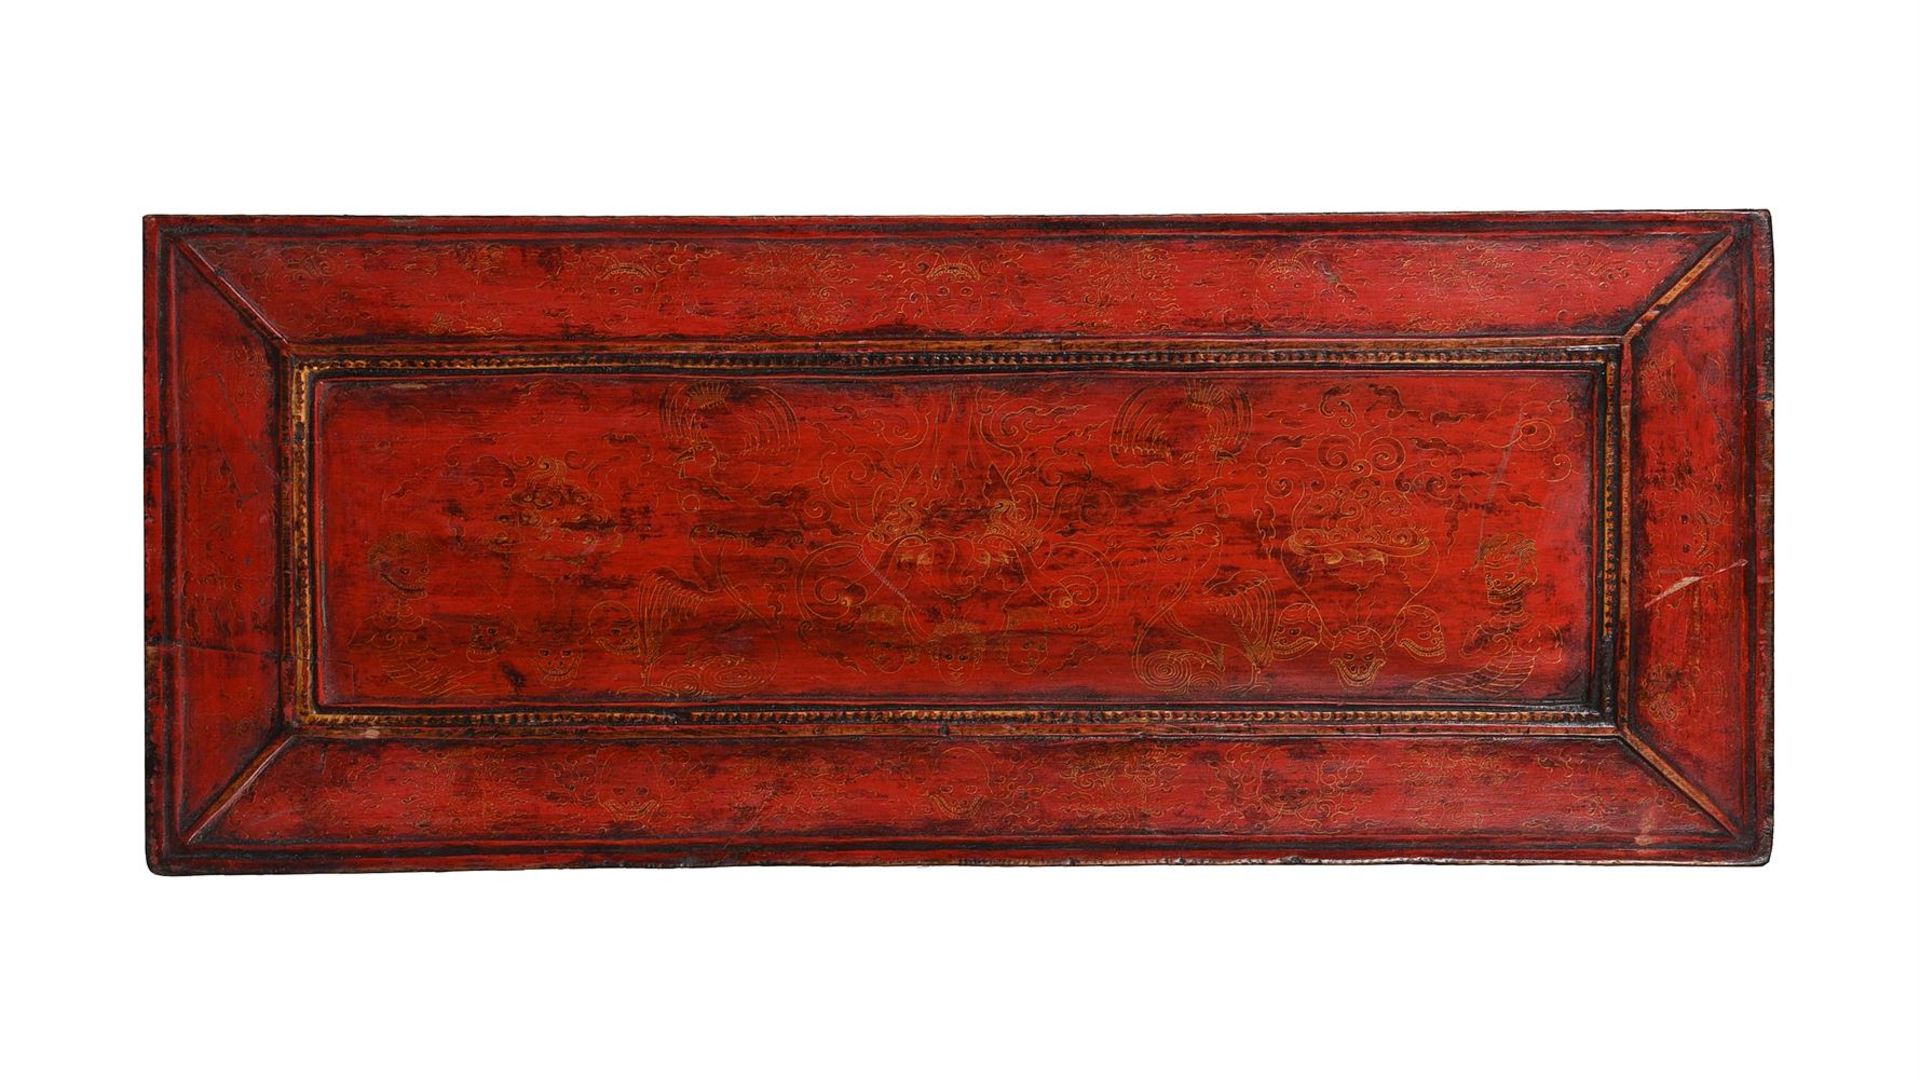 A Tibetan painted wood book cover